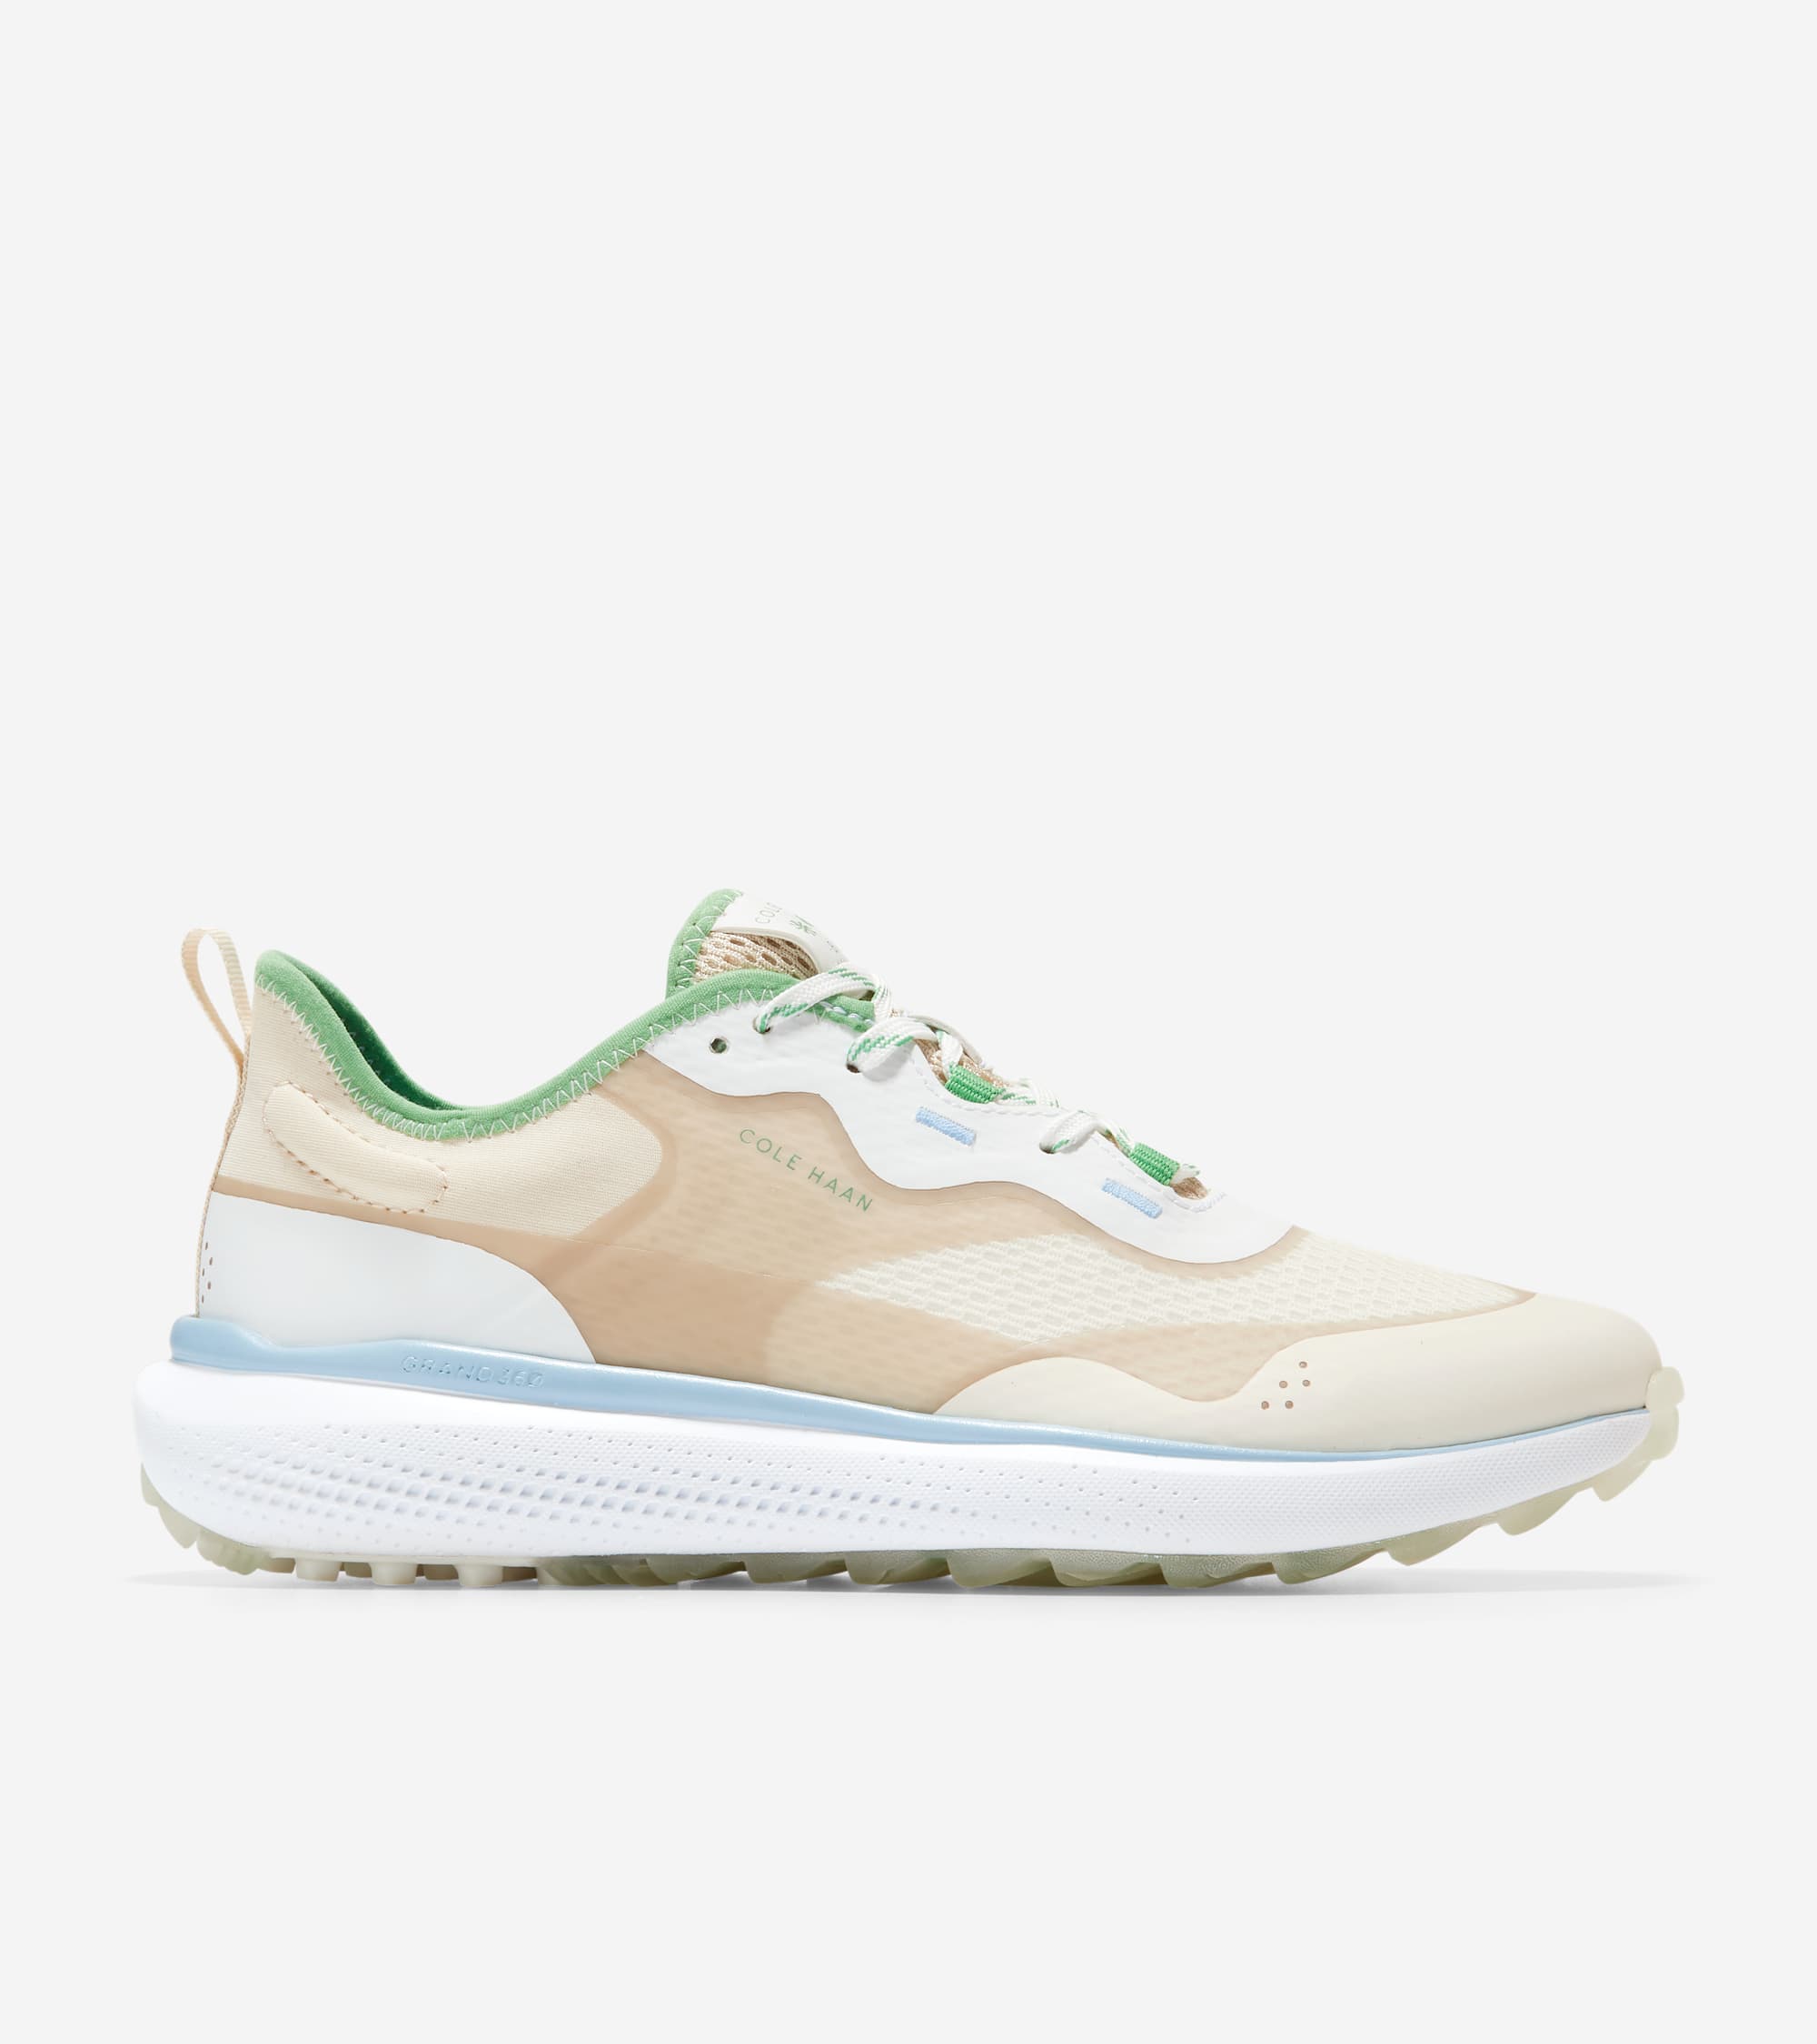 Cole Haan just launched new shoes with Byrdie Golf Social Wear